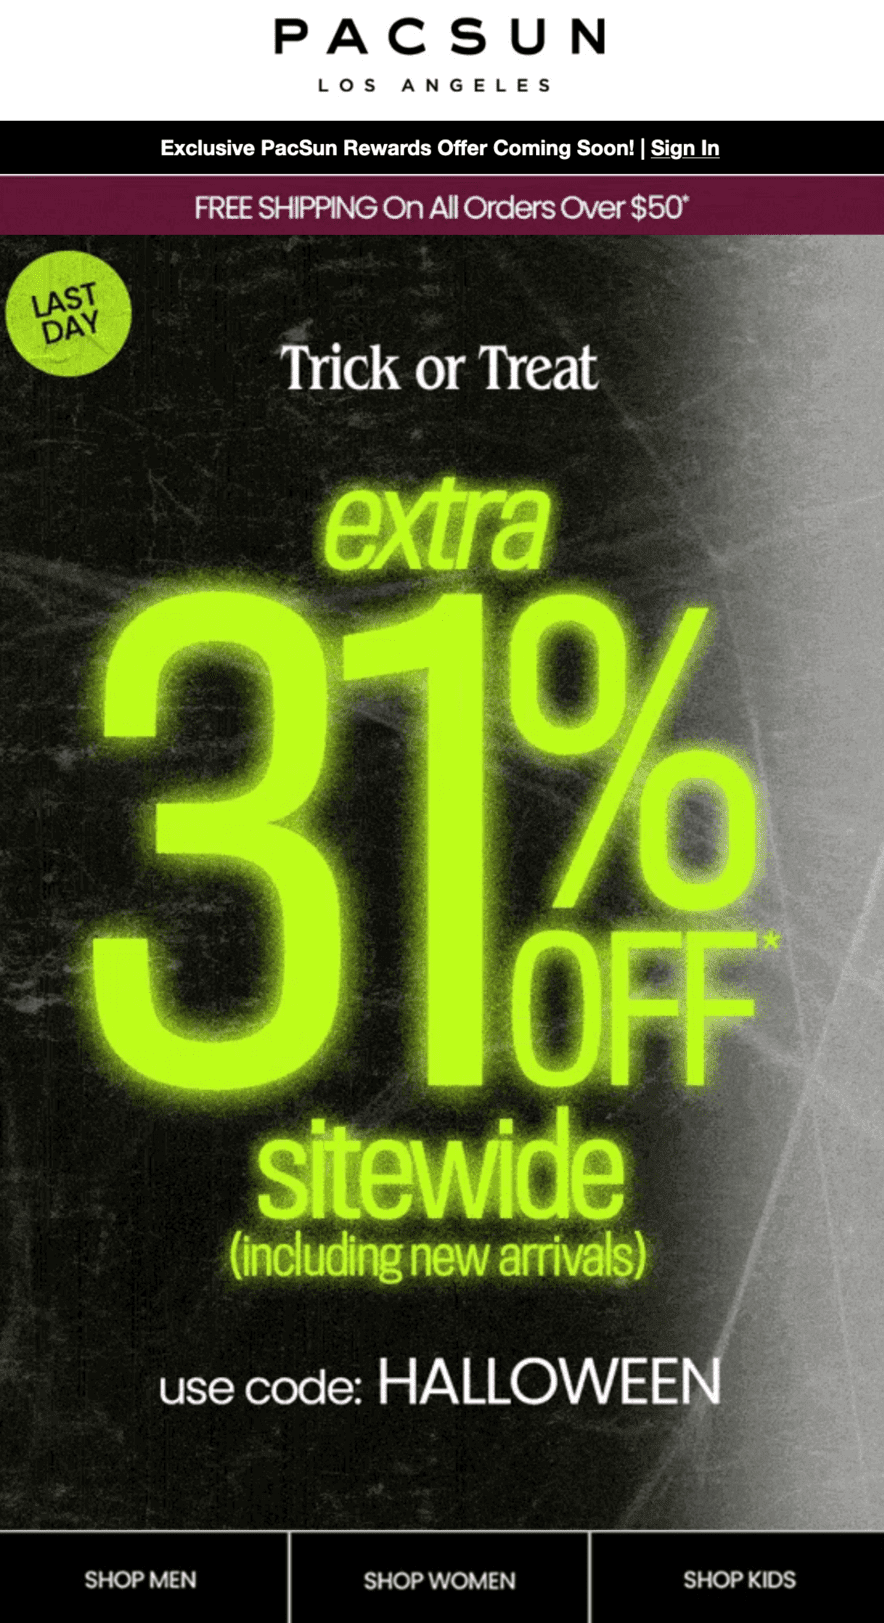 A Halloween email with a 31% discount with code Halloween.